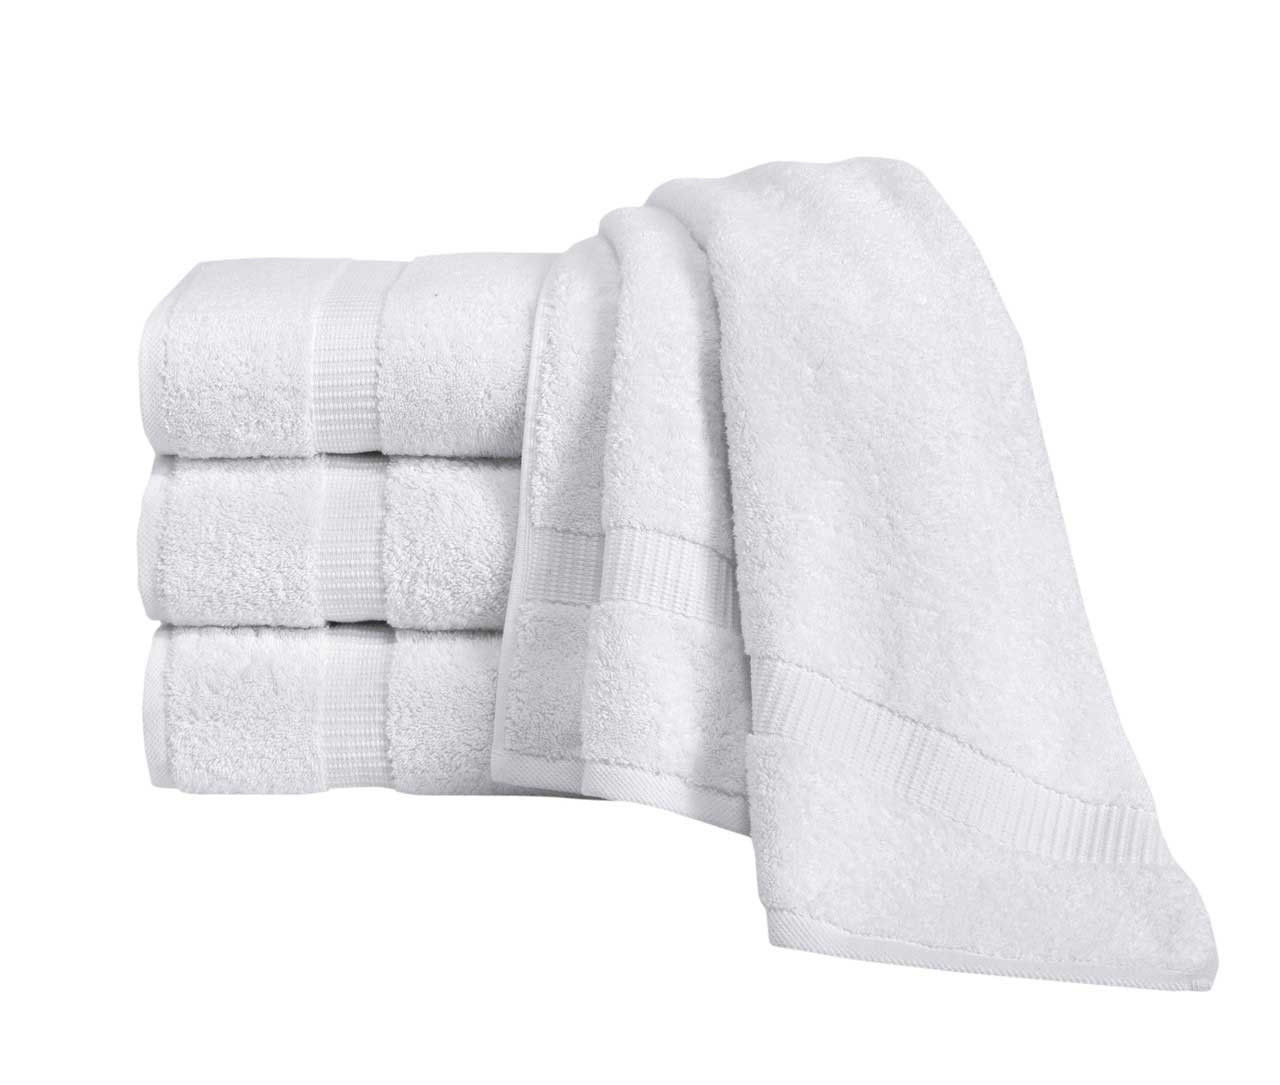 What color are the towels in the White Royal Turkish Towels Villa Collection?